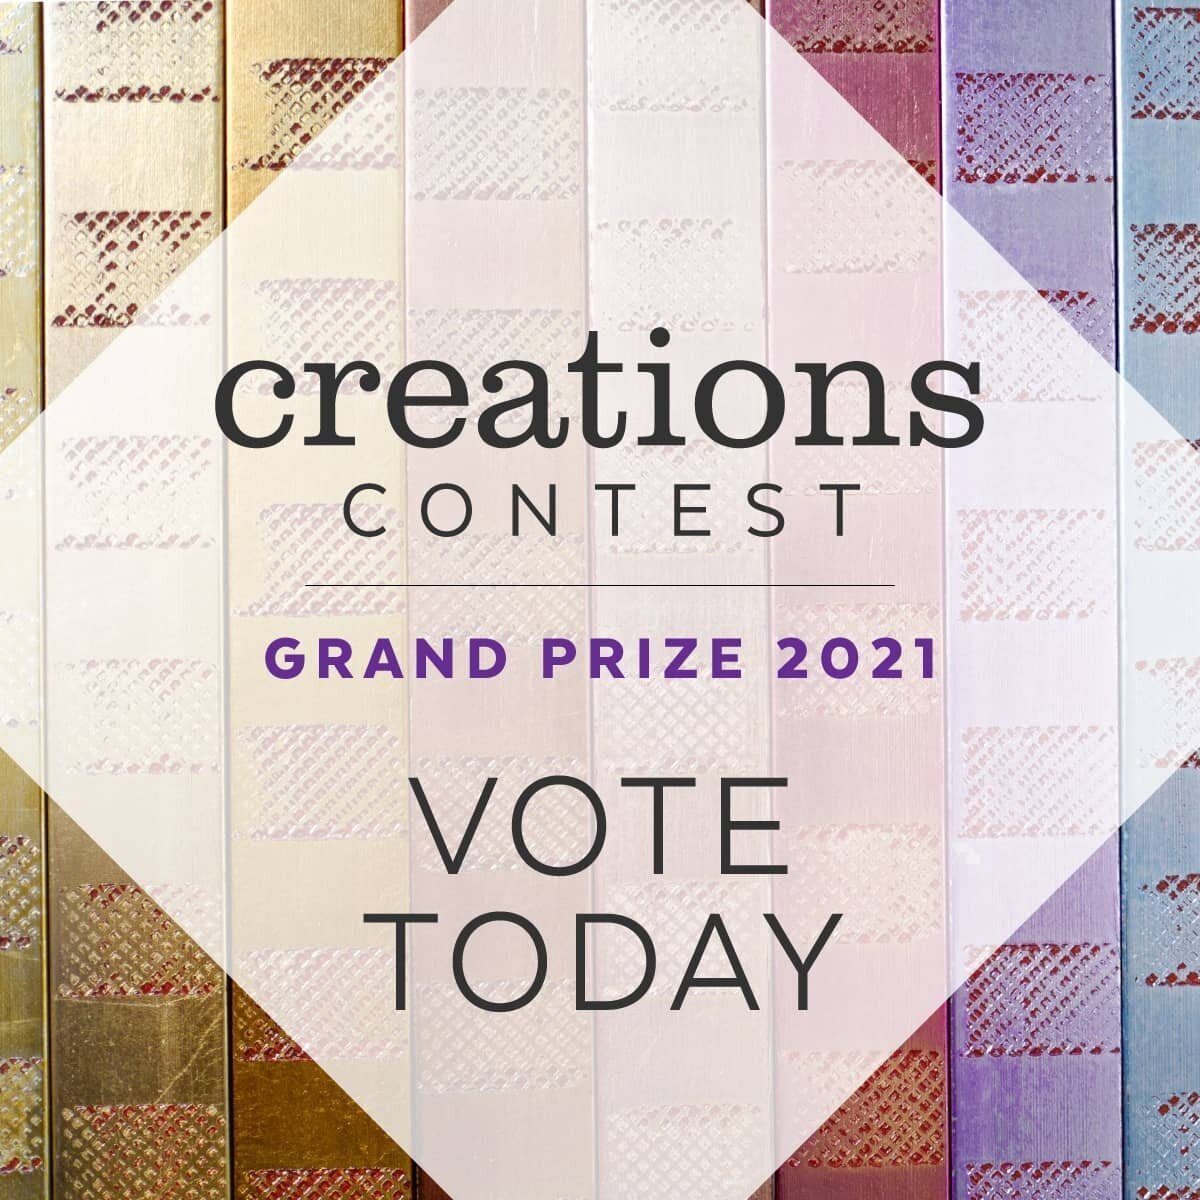 VOTING IS OPEN! Vote for your favorite #framedesign today! (Contest link in bio.) Who do you love? The perfect hand-painted ombre Prisma from @framezillapgh or the magical underwater puzzle-pattern Prisma from @artisticindulgenceframing or the happie